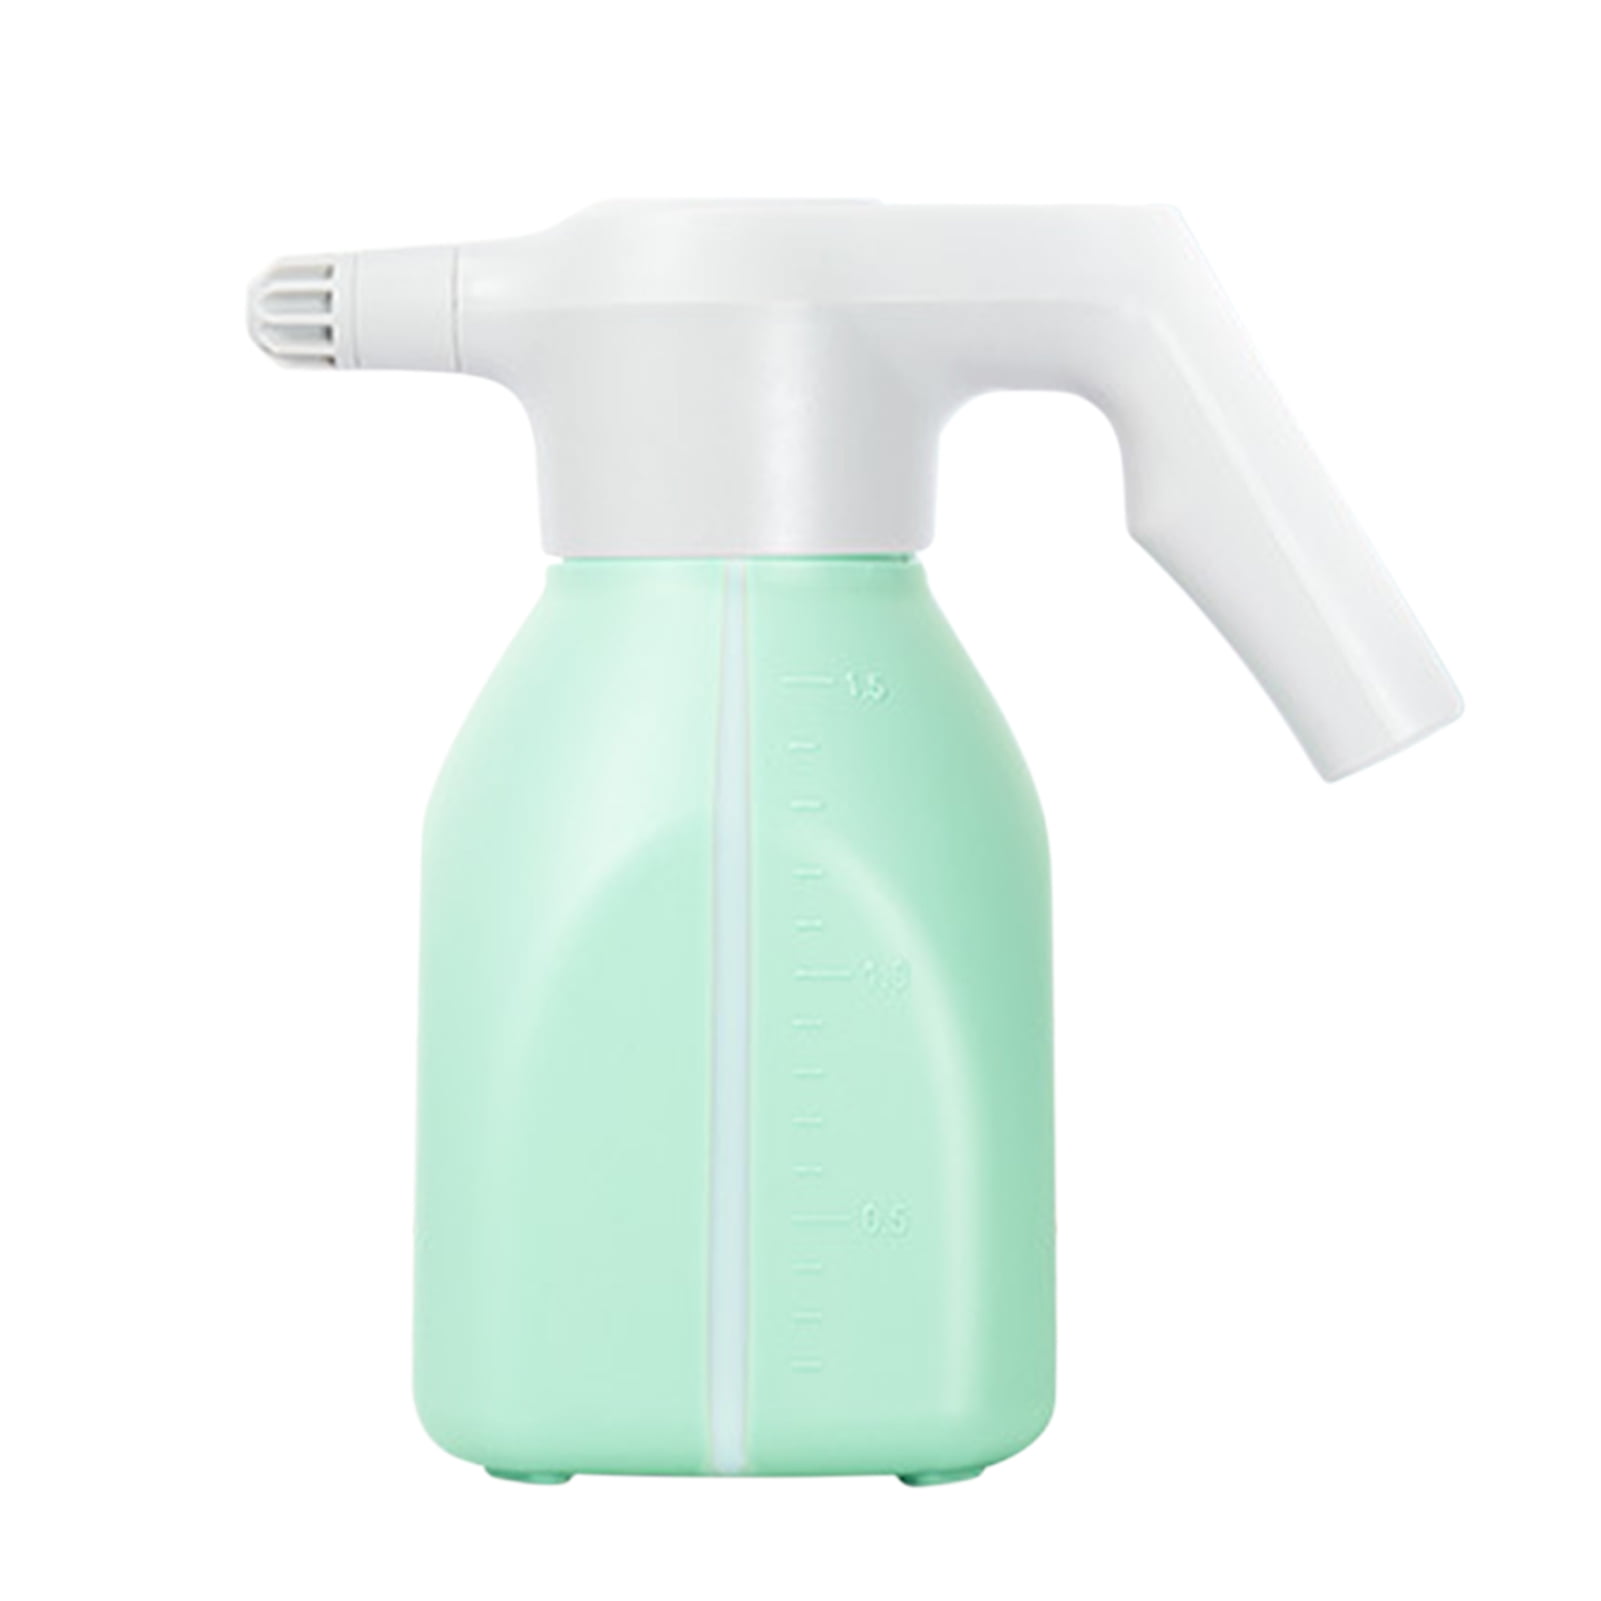 2L Electric Watering Can Watering Spray Pressure Bottle Plant Flower Sprayer USA 